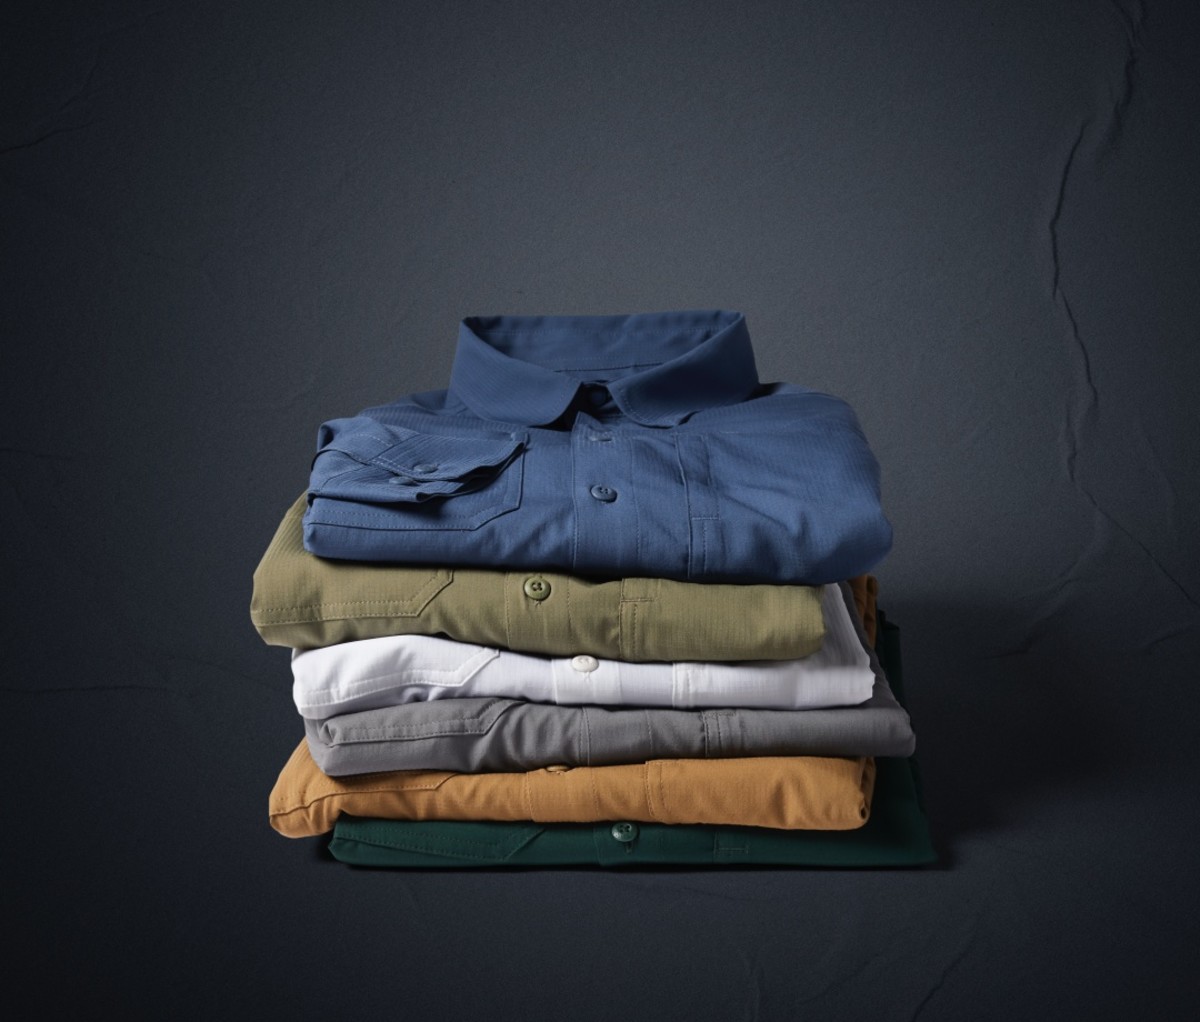 Multicolored Columbia Silver Ridge Utility Collection shirts folded and stacked against a black background.